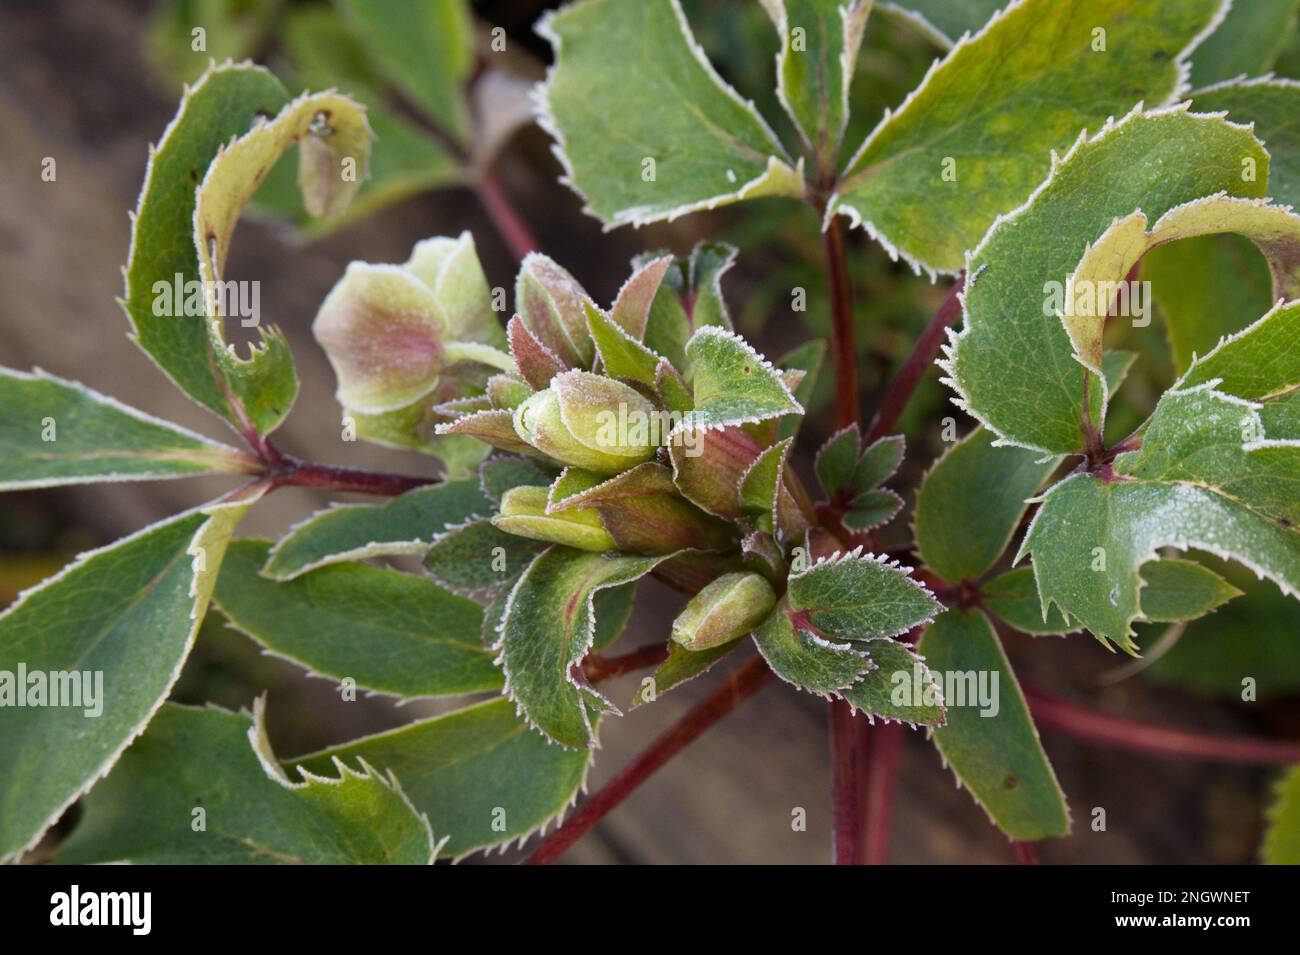 Frosted winter flowers and foliage of Helleborus × sternii, or Stern's hybrid hellebore in UK garden Januaryfrost Stock Photo